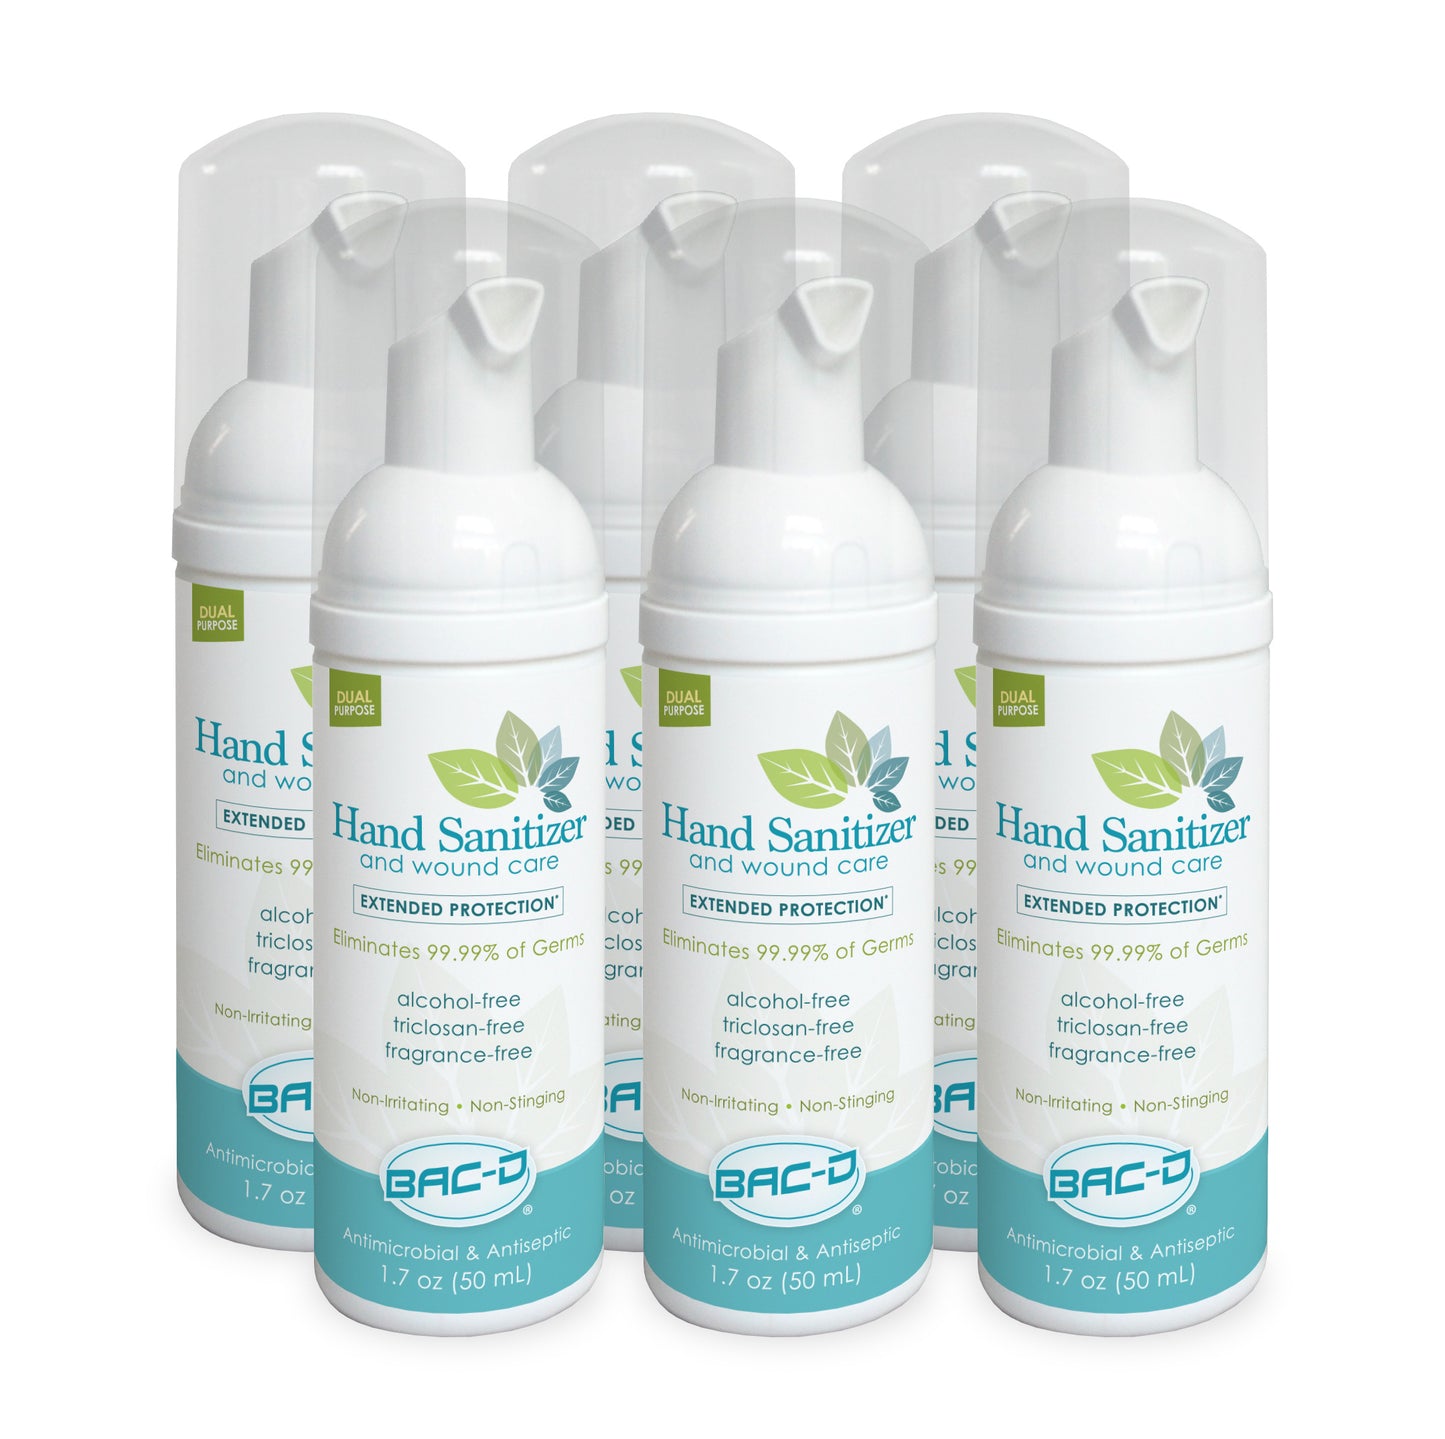 BAC-D® 1.7oz Foaming Alcohol Free Hand Sanitizers and Wound Care - 6 Pack